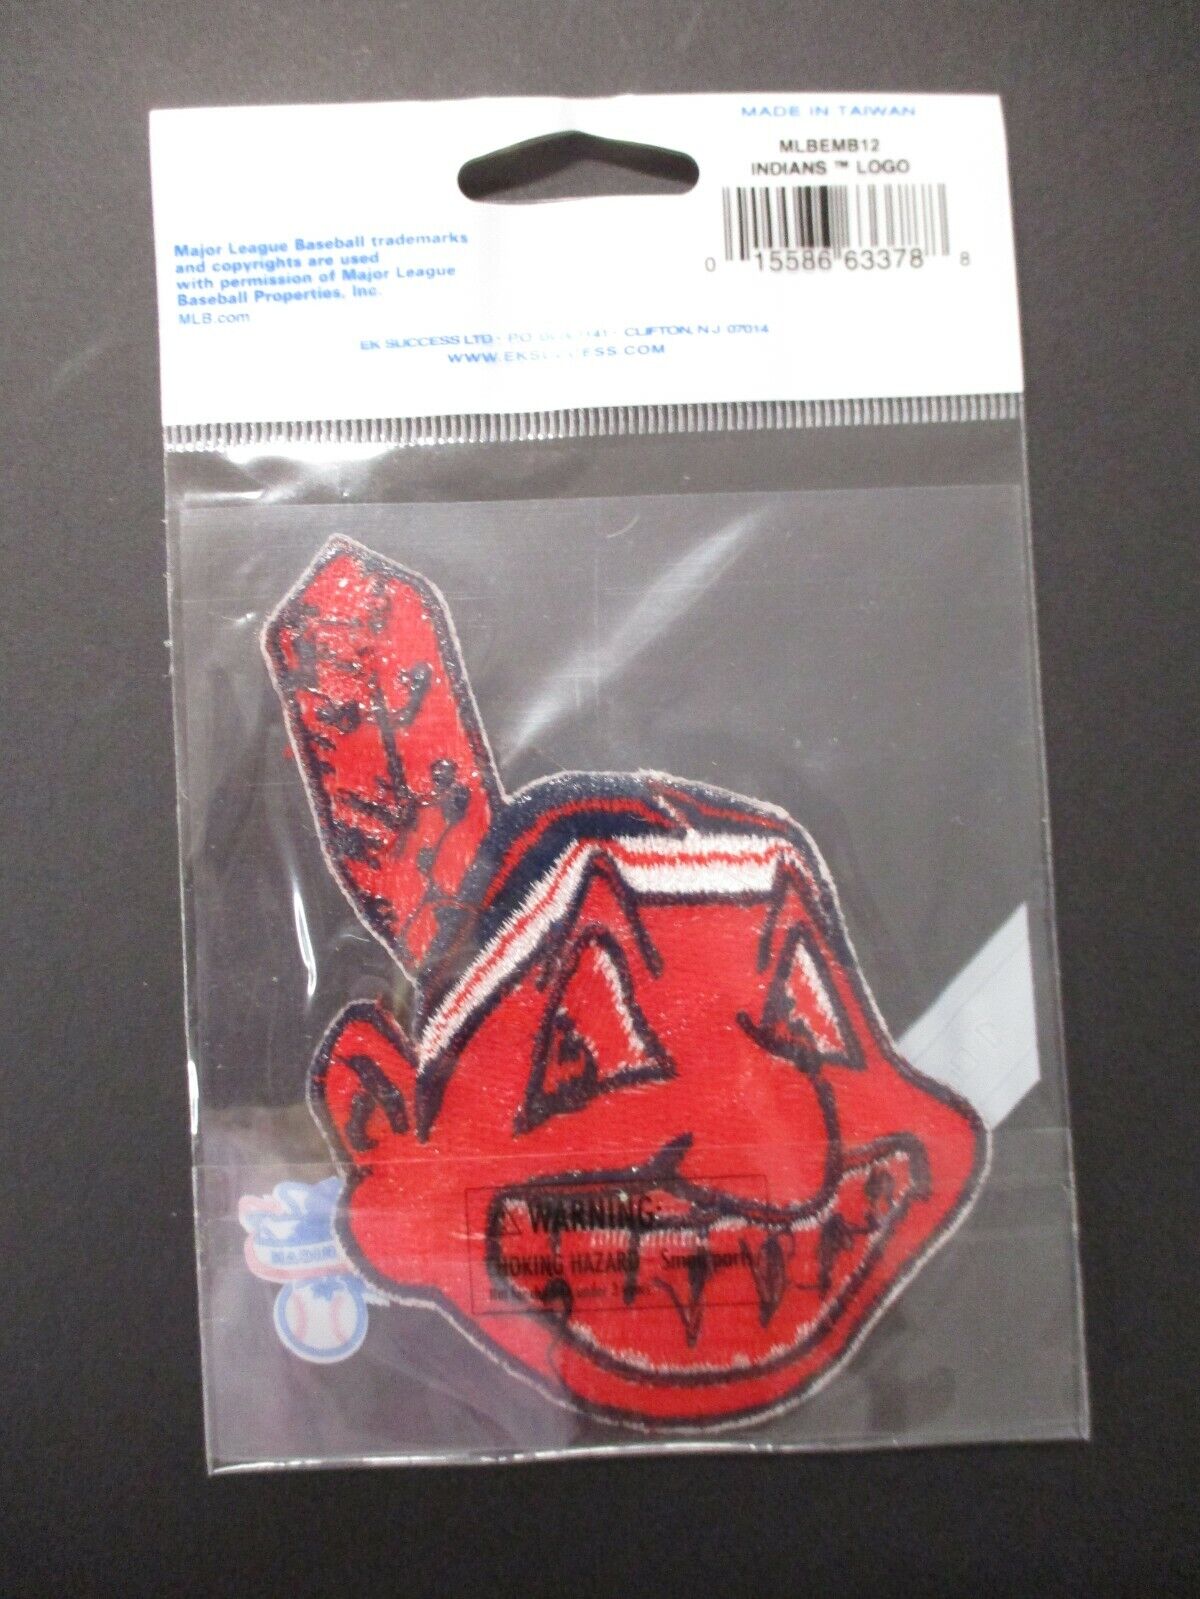 Cleveland Indians Chief Wahoo patch size 3 x 4 inches New in Bag